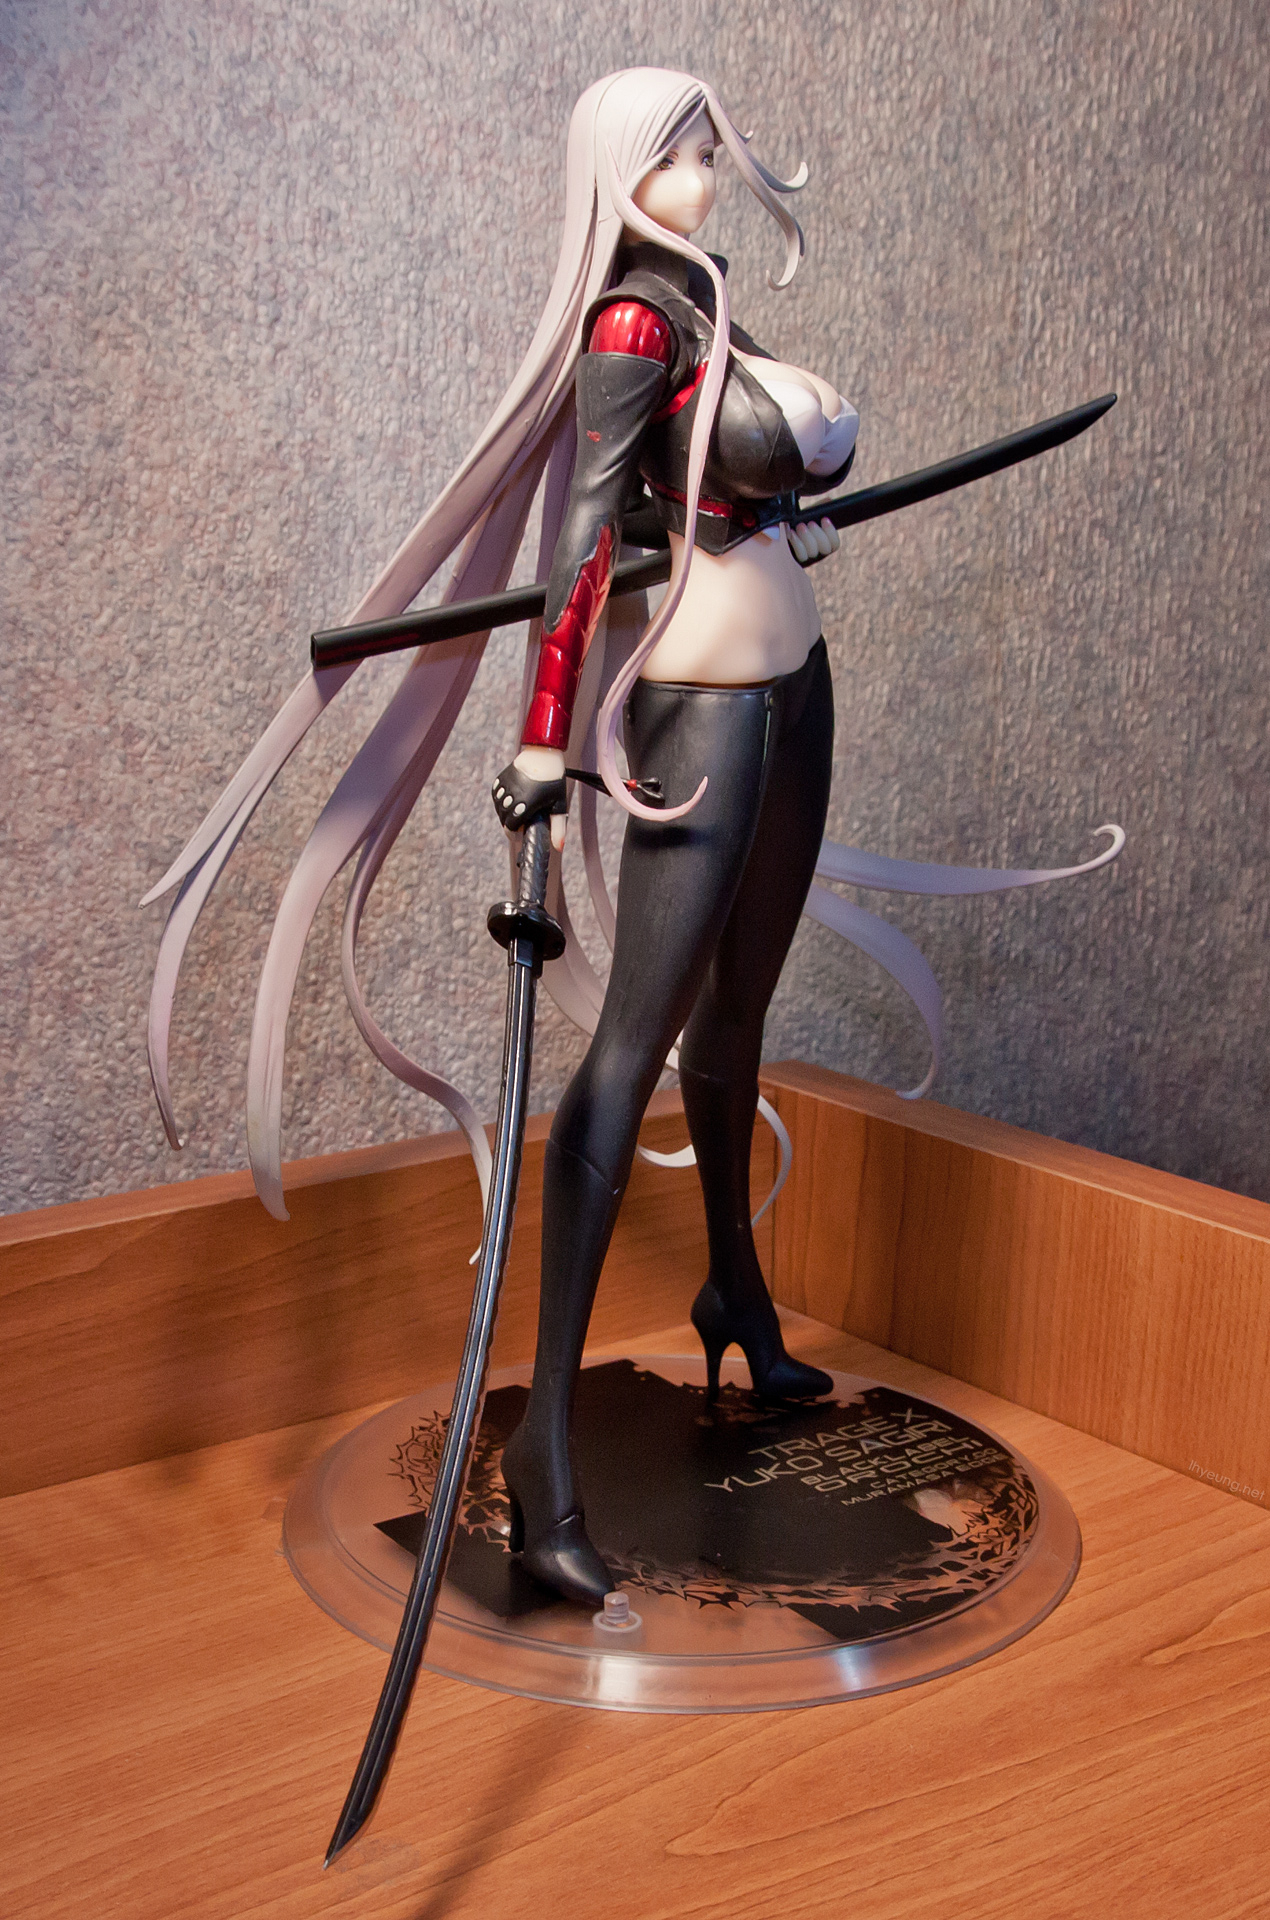 Other than that, this figure is actually quite well replicated. 